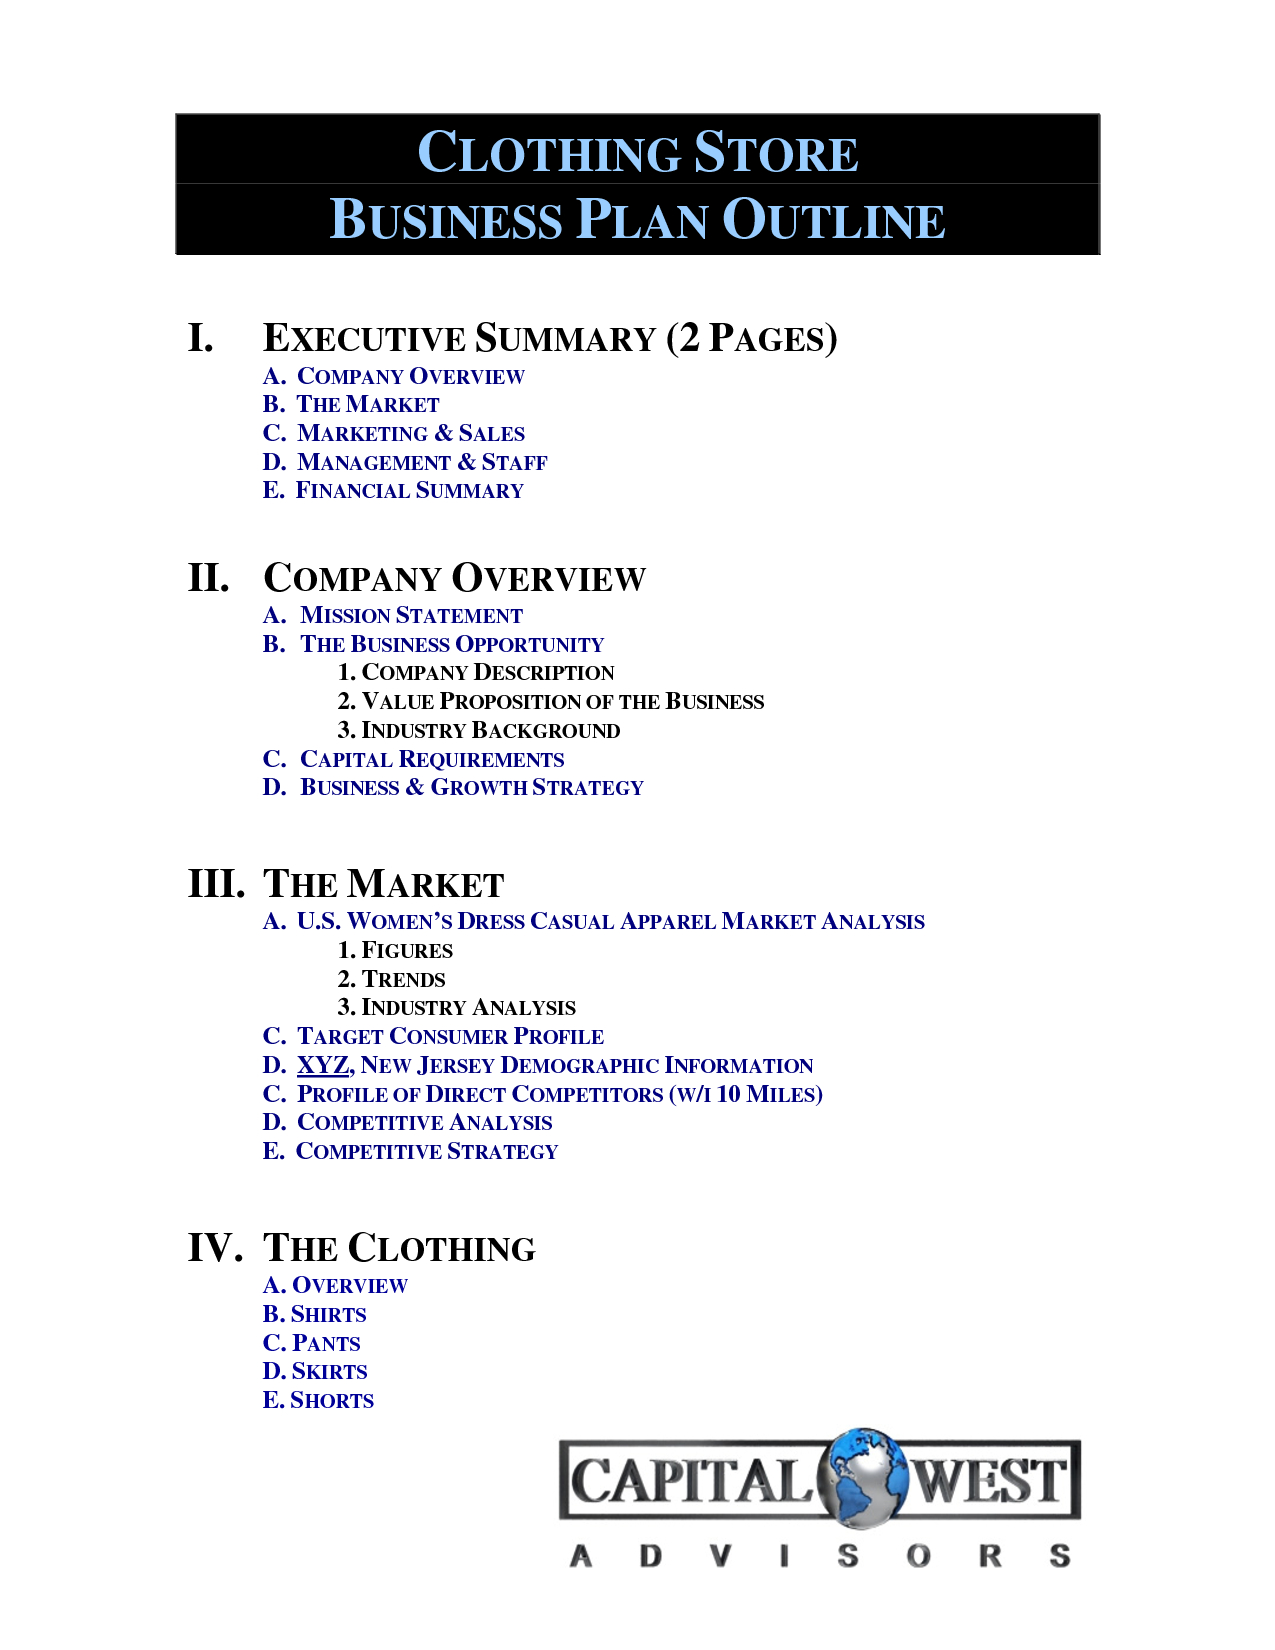 Clothing Line Business Plan Template Free | Free Business Template with regard to Royalty Statement Template